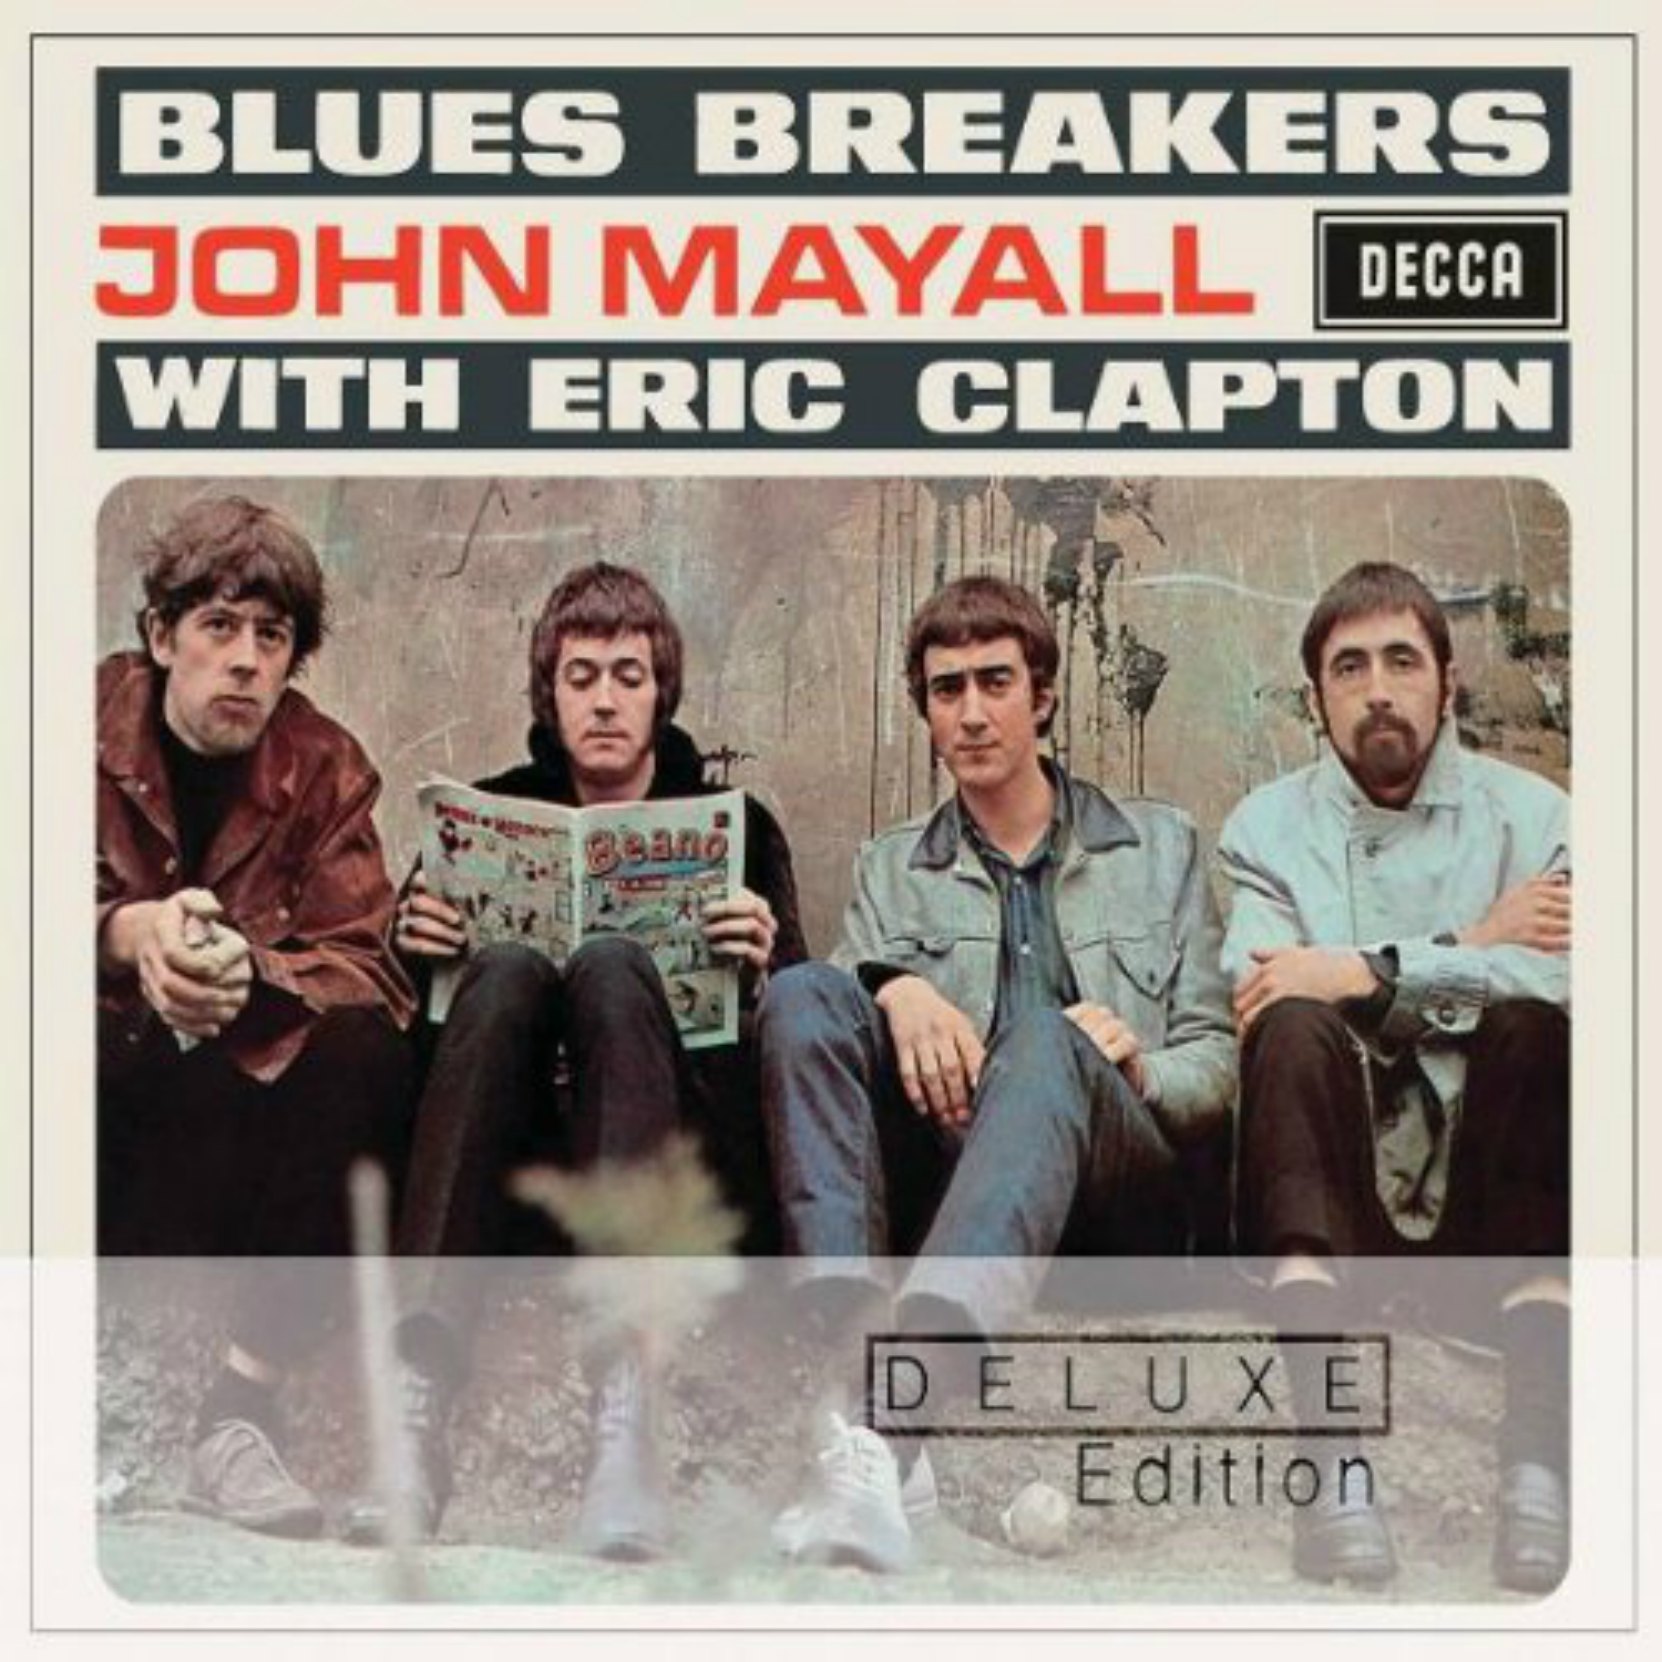 CD Cover, Blues Breakers With Eric Clapton by John Mayall, Deluxe edition